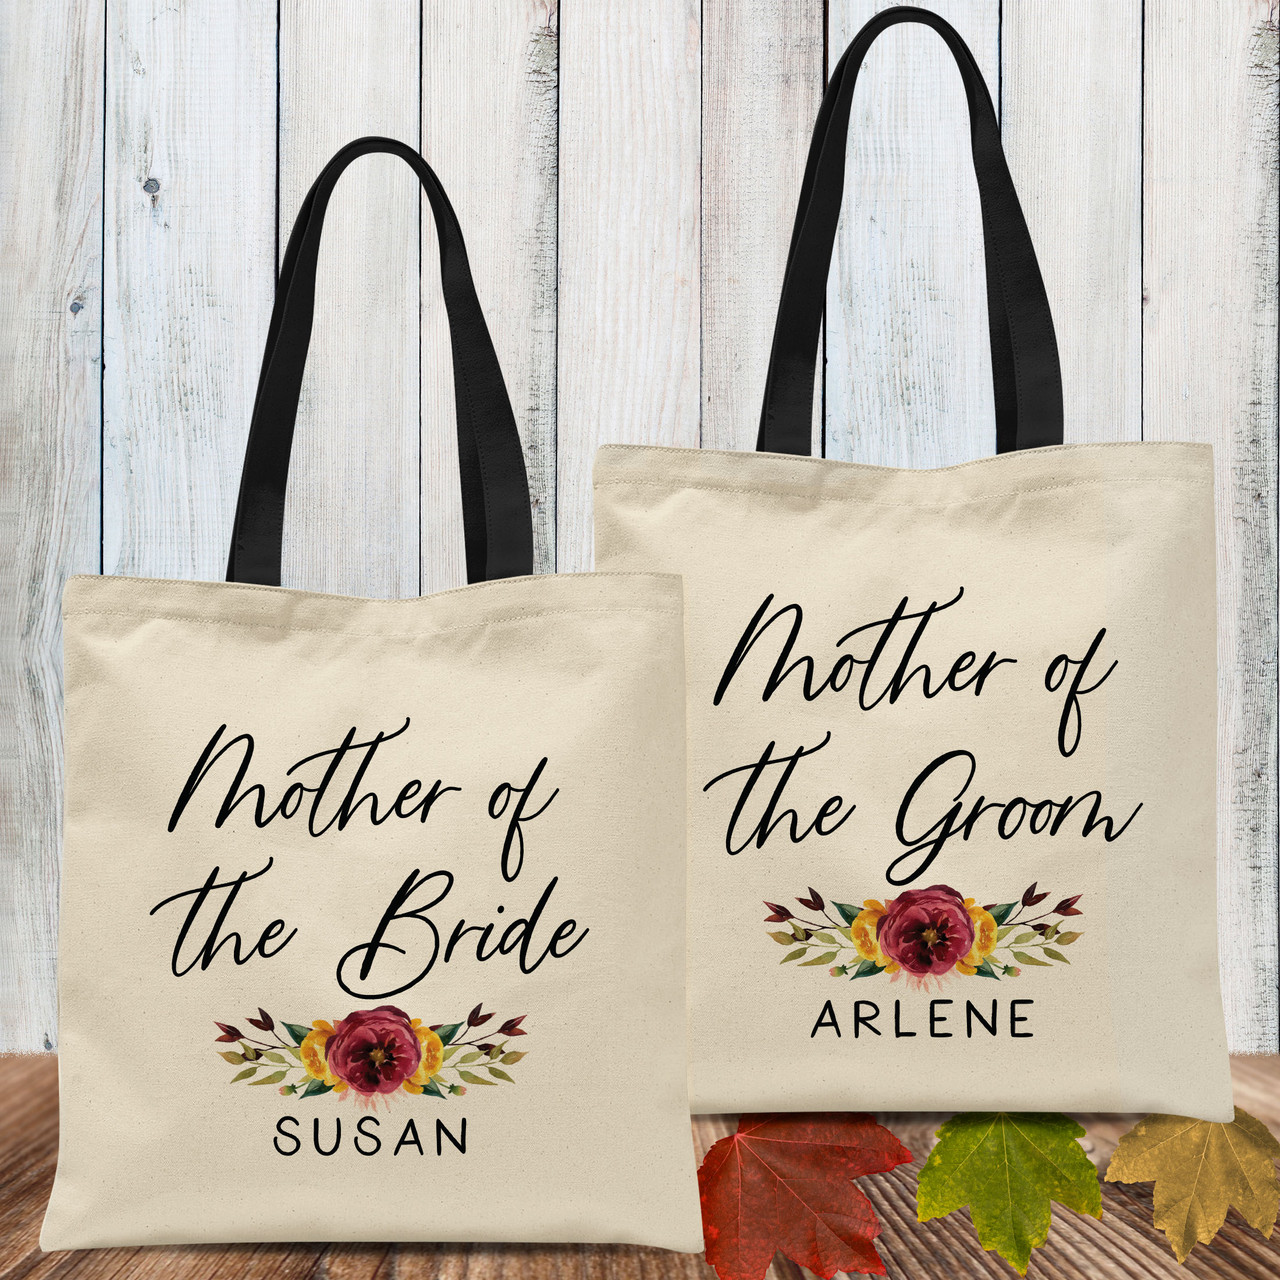 Custom Tote Bags: Fall Floral Bridal Party